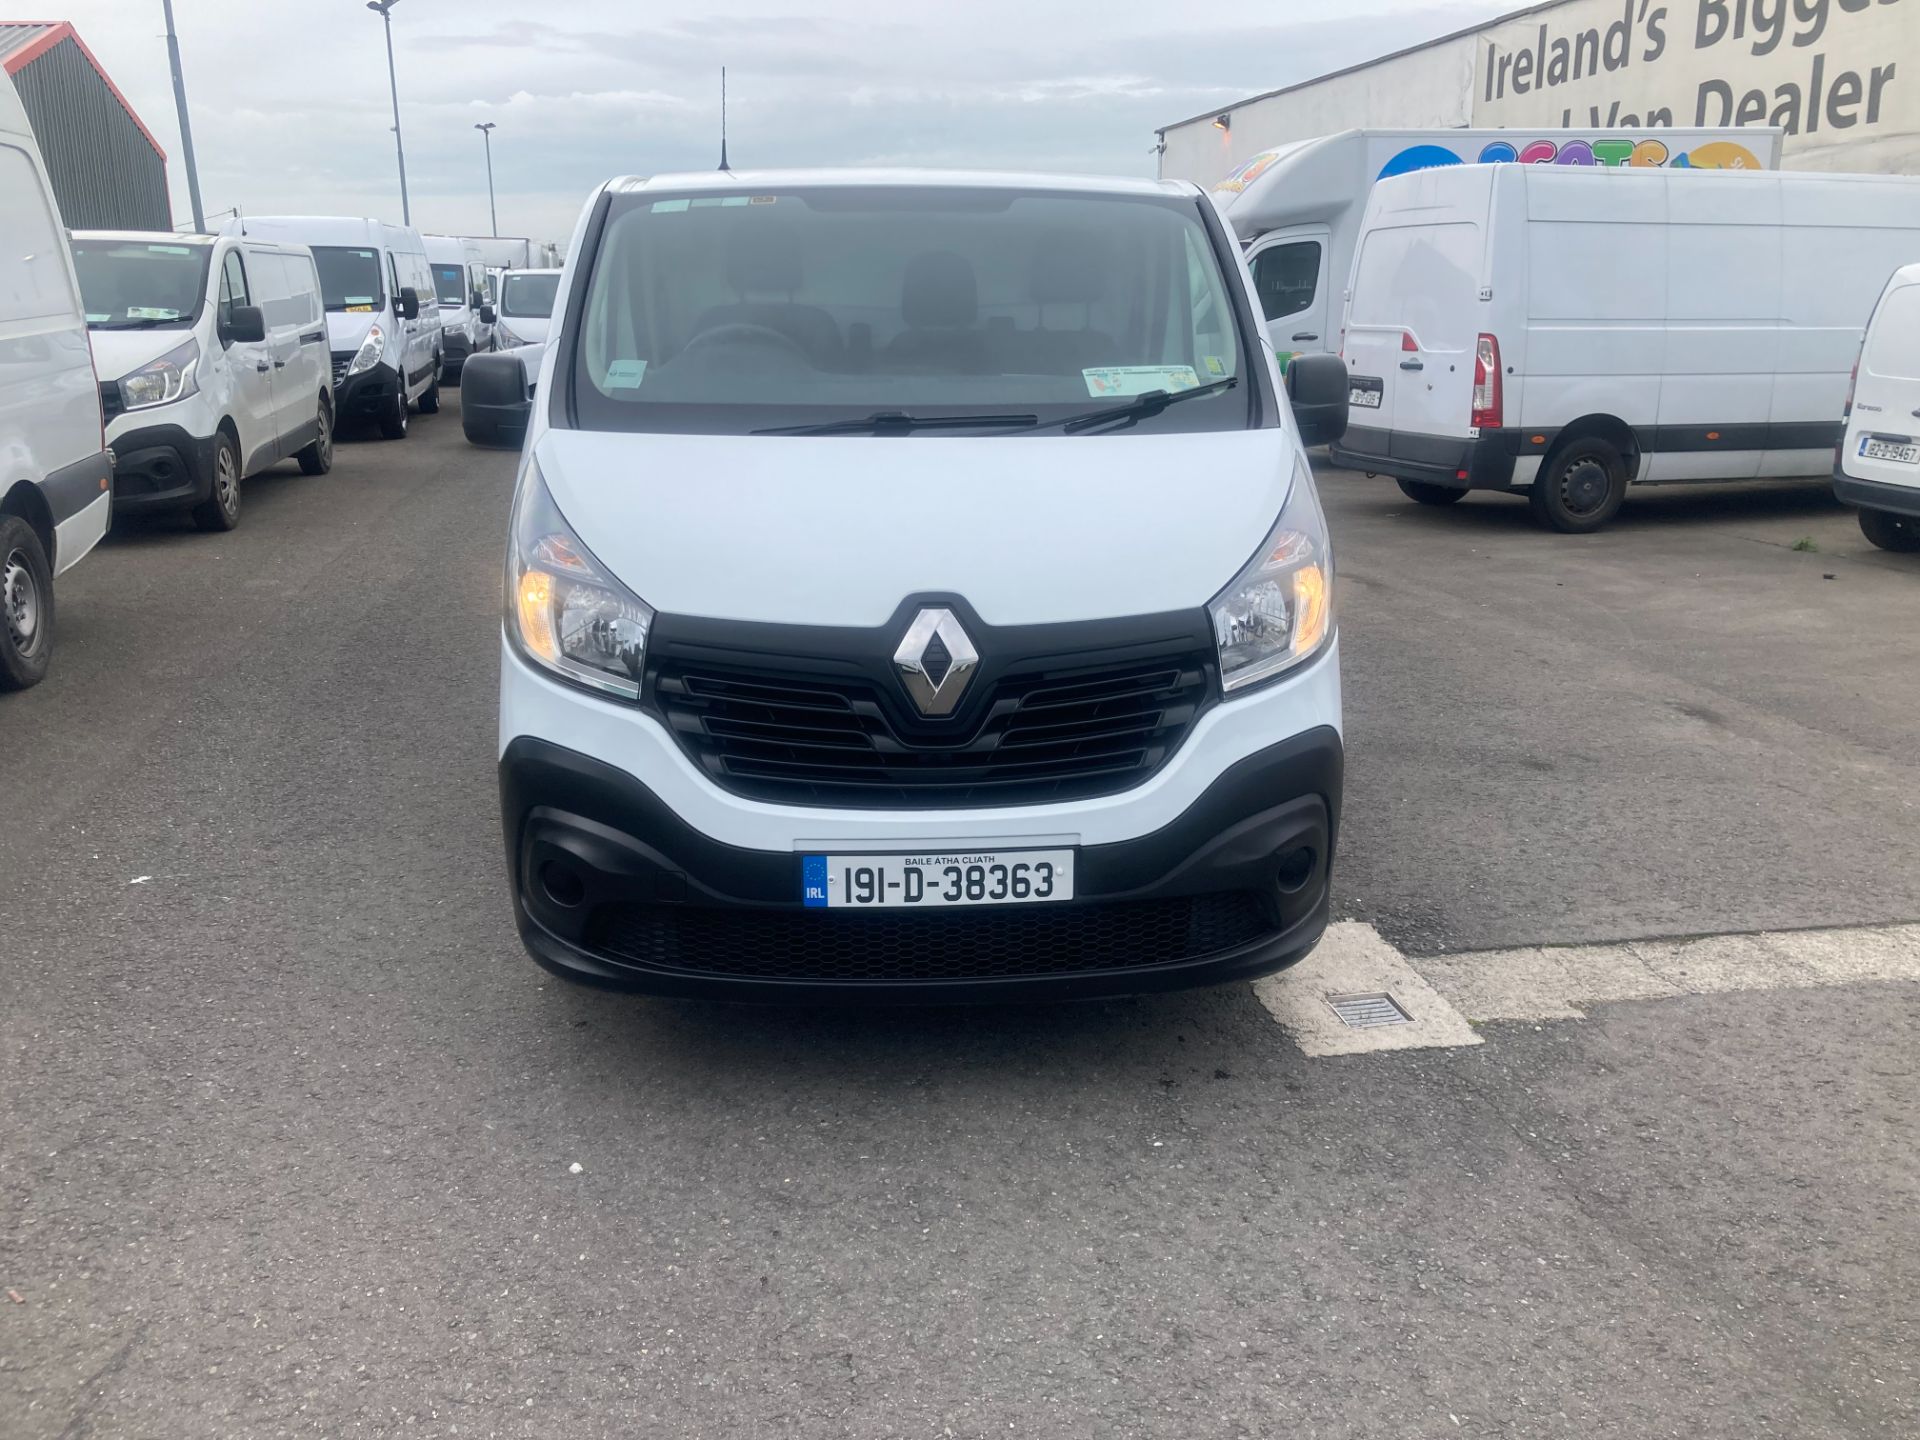 2019 Renault Trafic LL29 DCI 120 Business (191D38363) Thumbnail 2